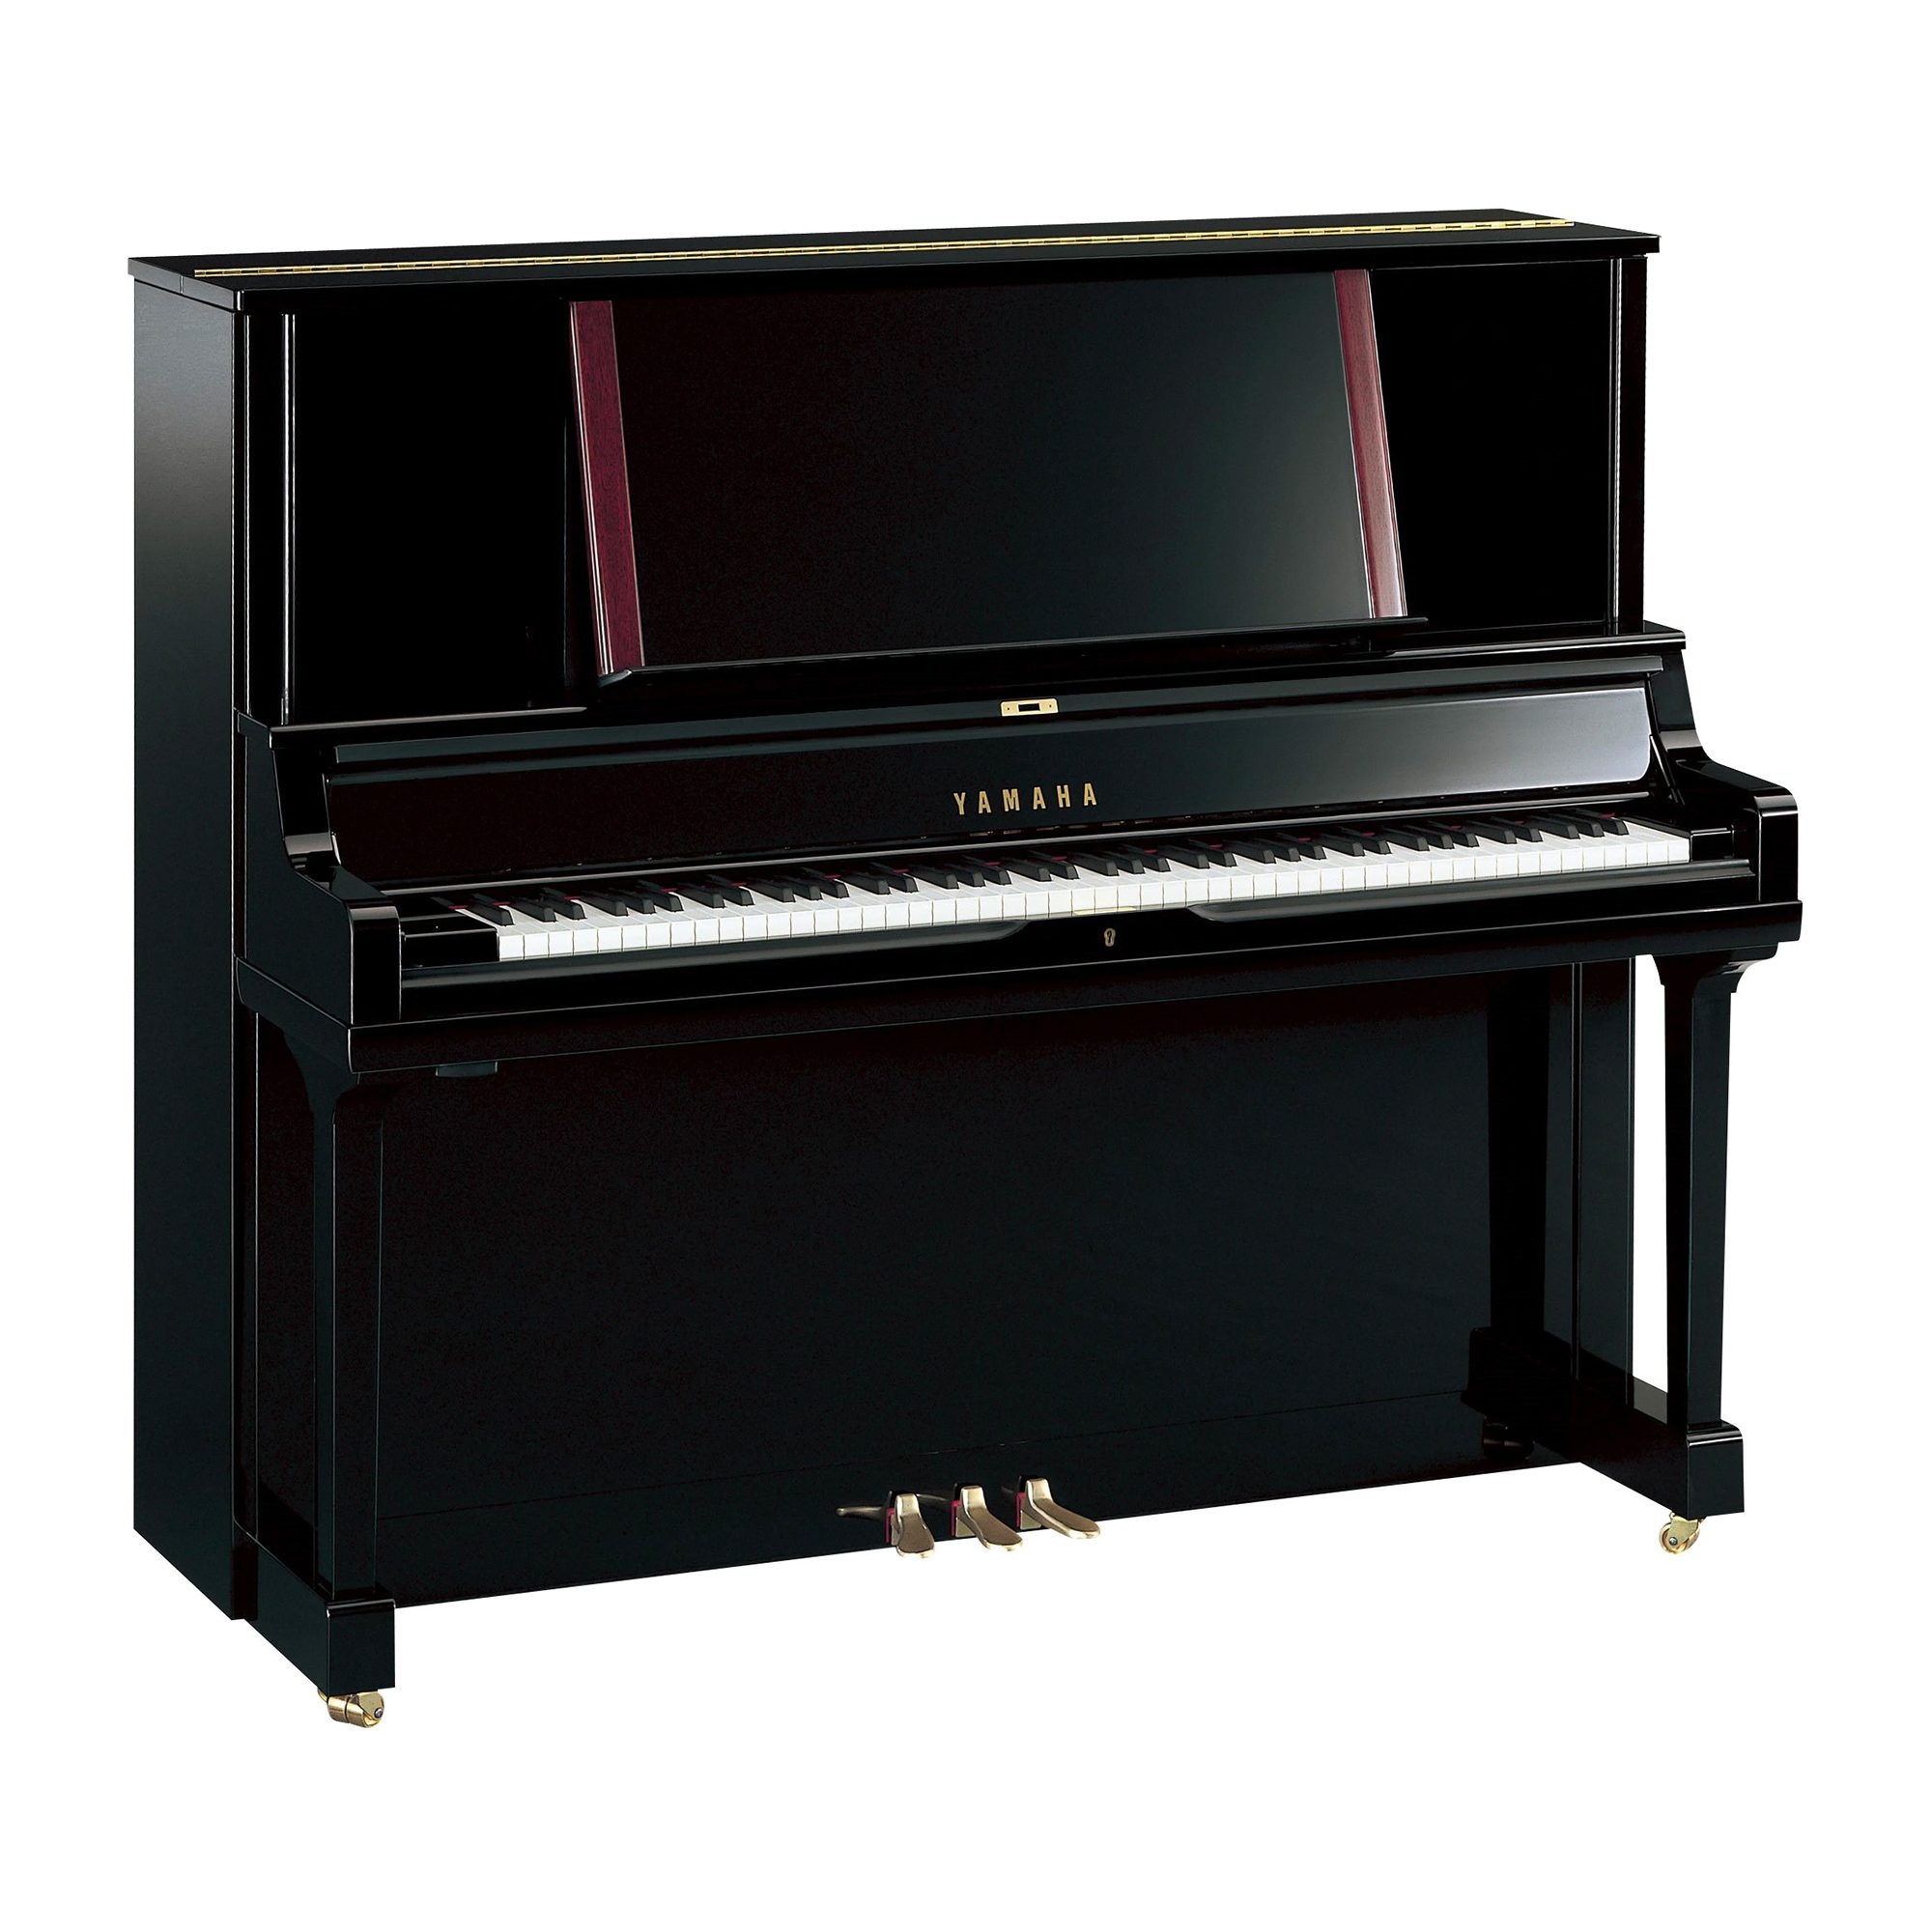 Large black upright piano with fallboard separate from music stand.